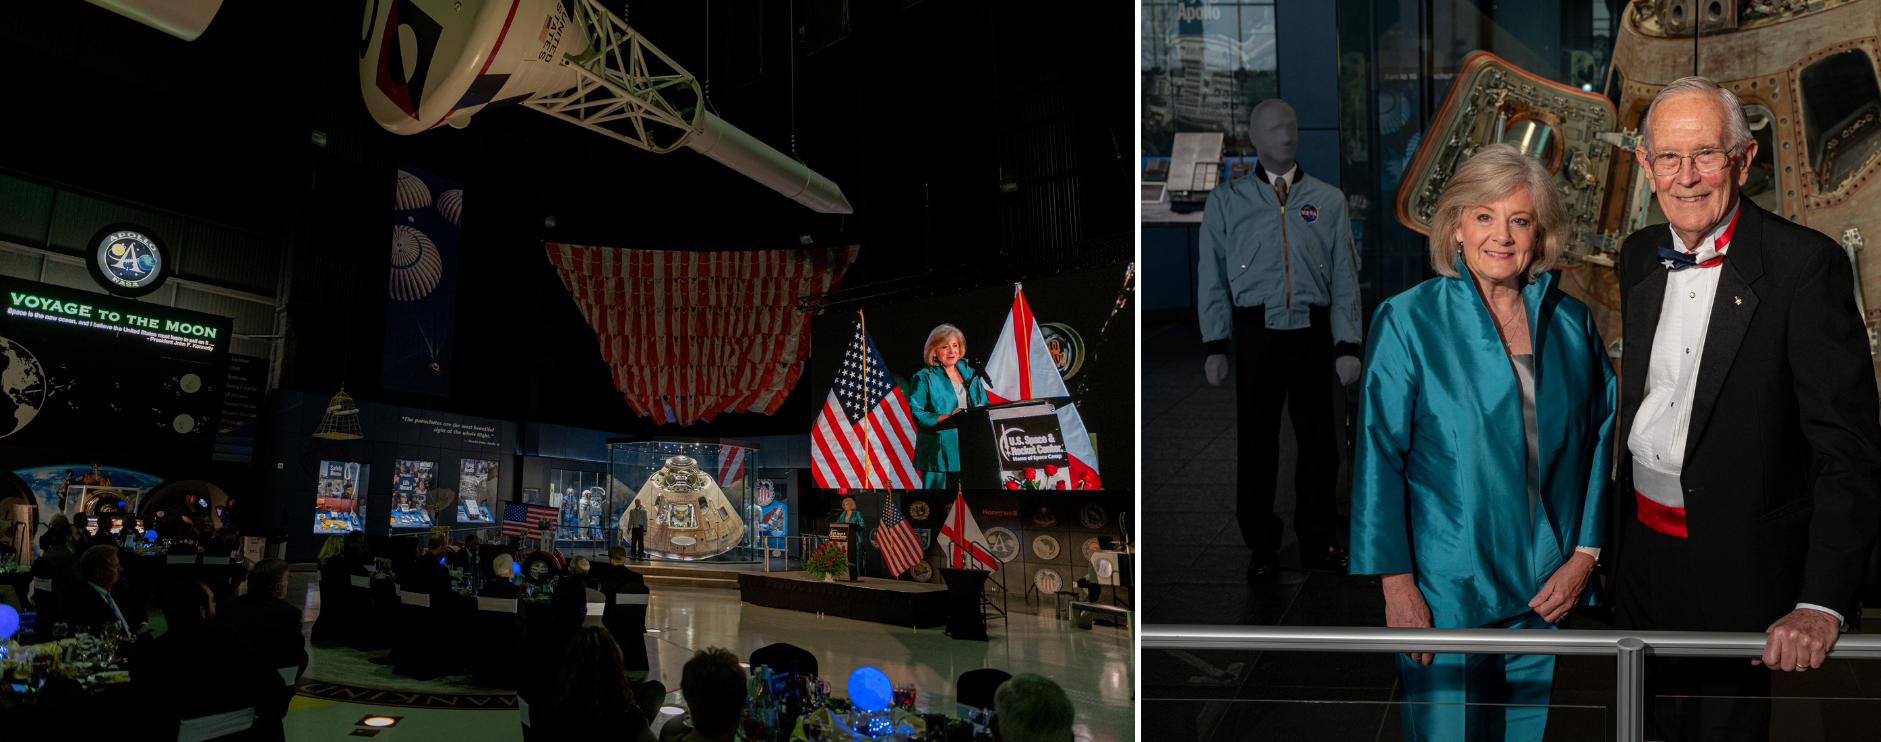 Images from the Apollo to Artemis Gala inside the U.S. Space & Rocket Center’s Davidson Center on April 20.